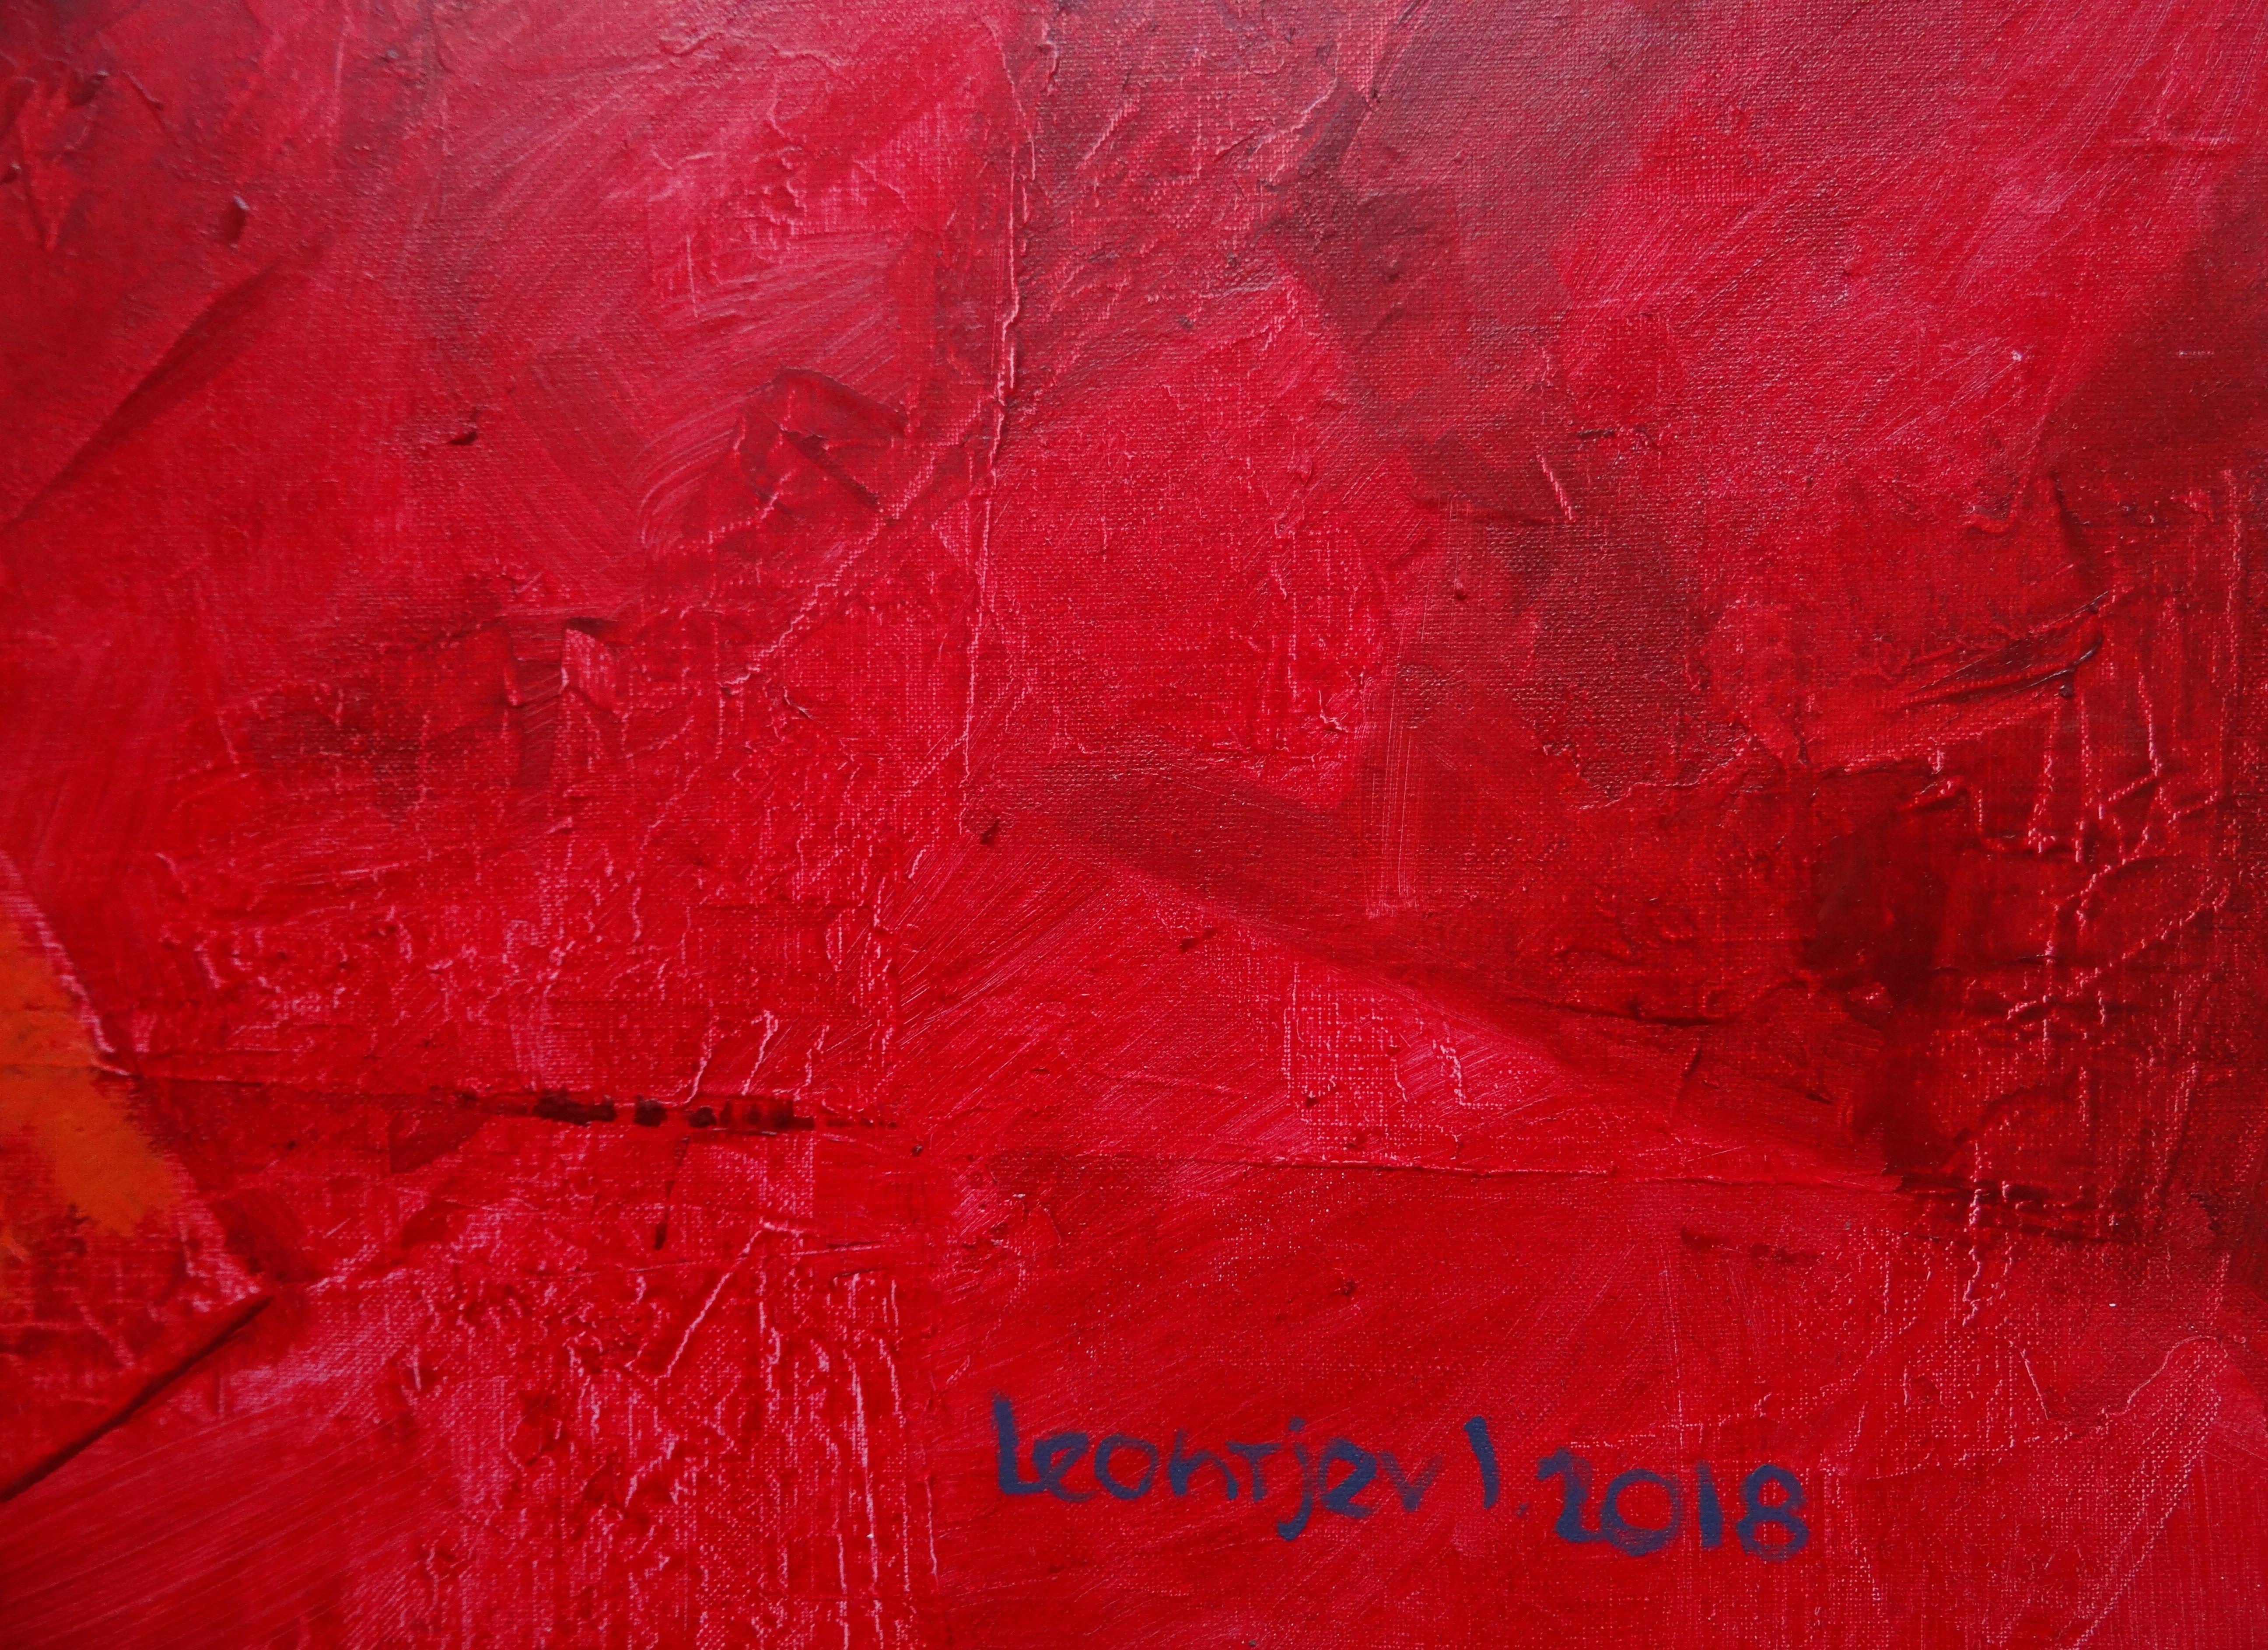 Red tango. Abstract large size painting in red. 2018, oil on canvas, 100x120 cm - Painting by Igor Leontiev